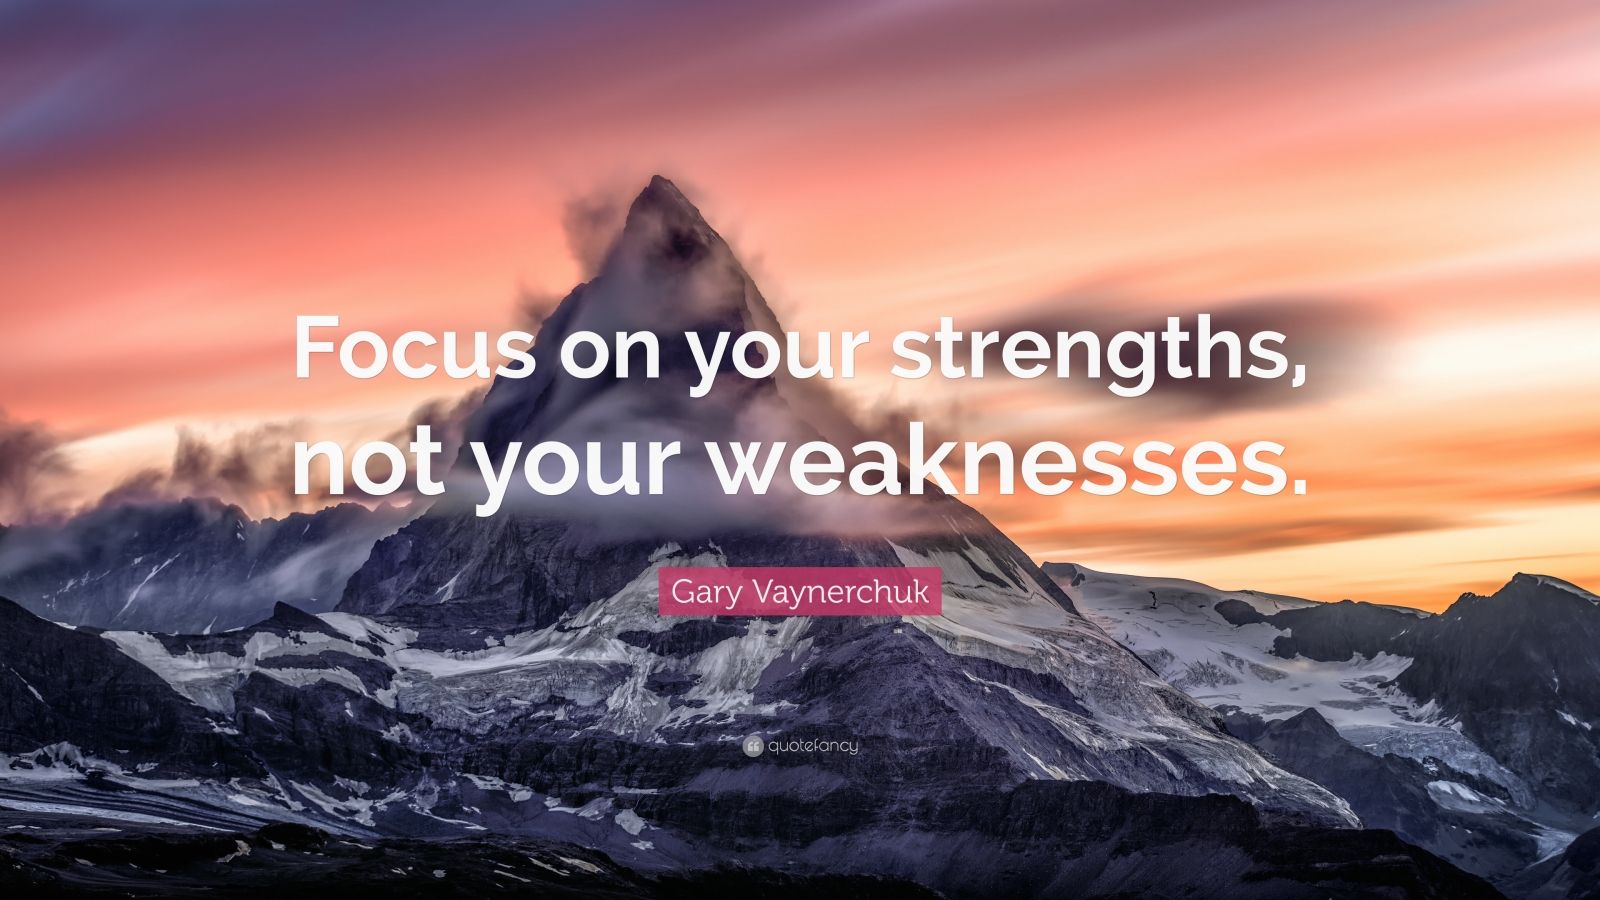 Gary Vaynerchuk Quote “focus On Your Strengths Not Your Weaknesses” 9 Wallpapers Quotefancy